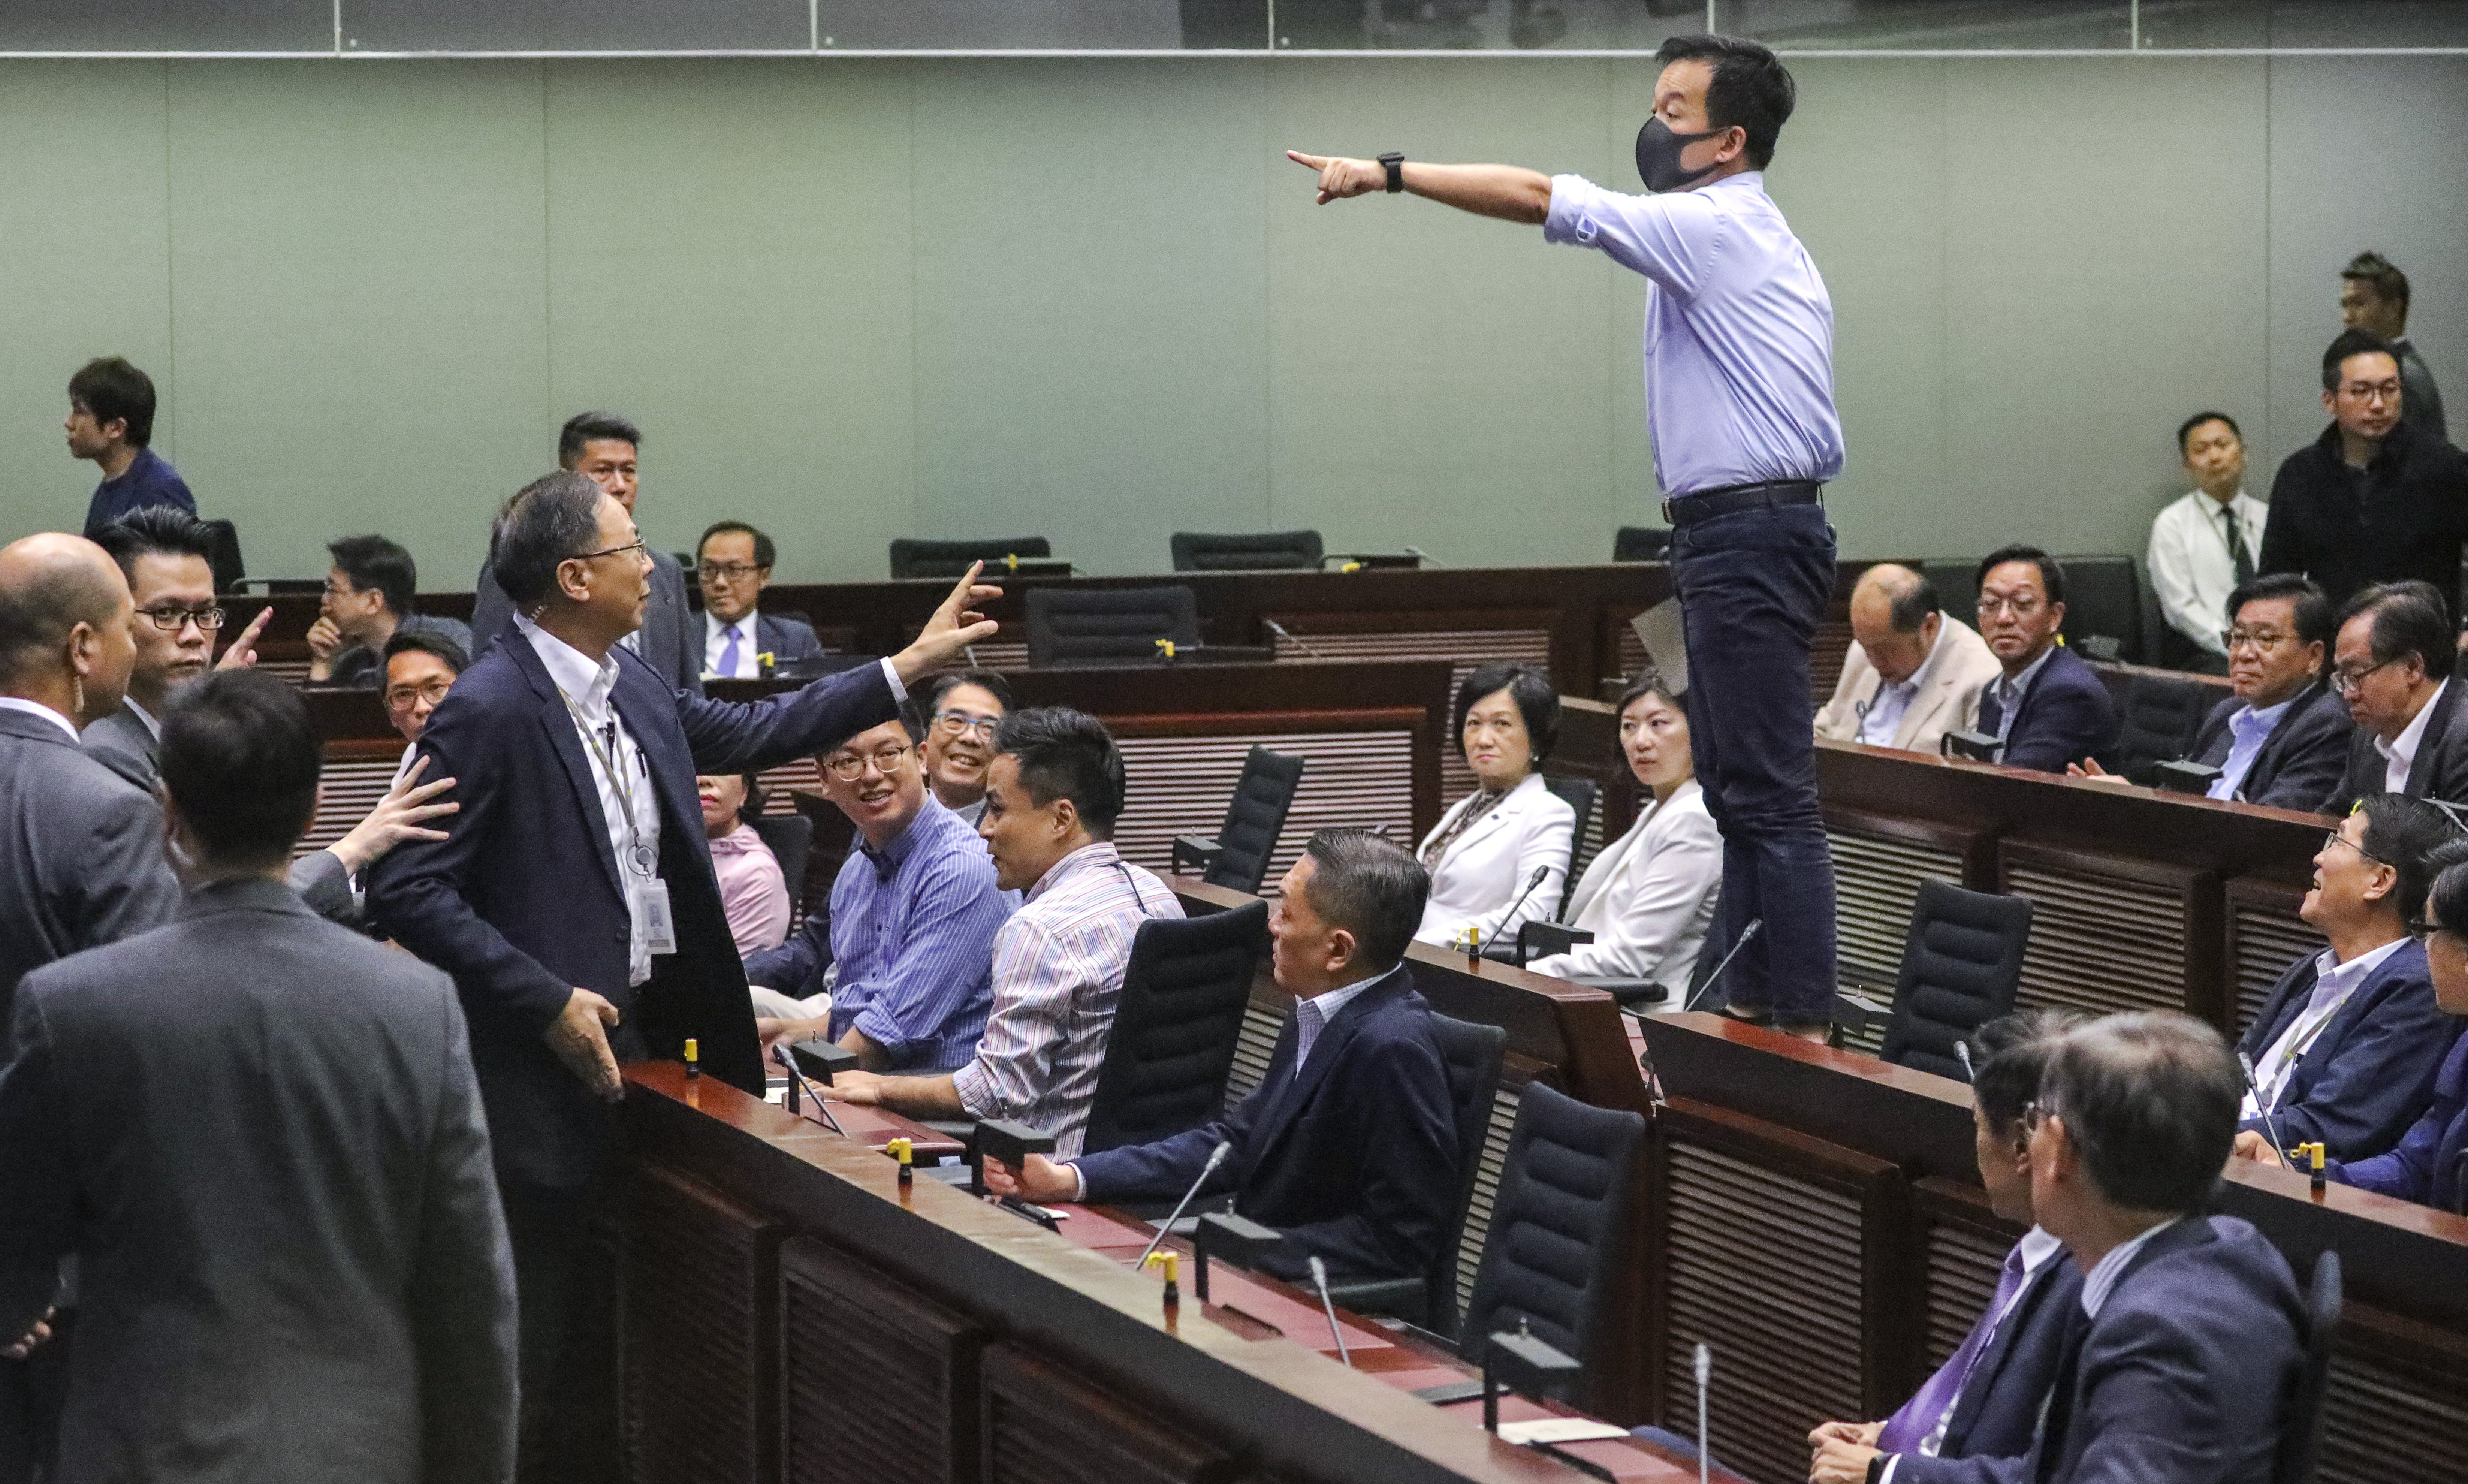 Lawmaker Raymond Chan Chi-chuen (right) takes a strong stand during the election of the chairman of the Legislative Council’s finance committee on October 14. Across two days, pro-democracy lawmakers raised repeated procedural questions and tried to delay the proceedings. Photo: May Tse